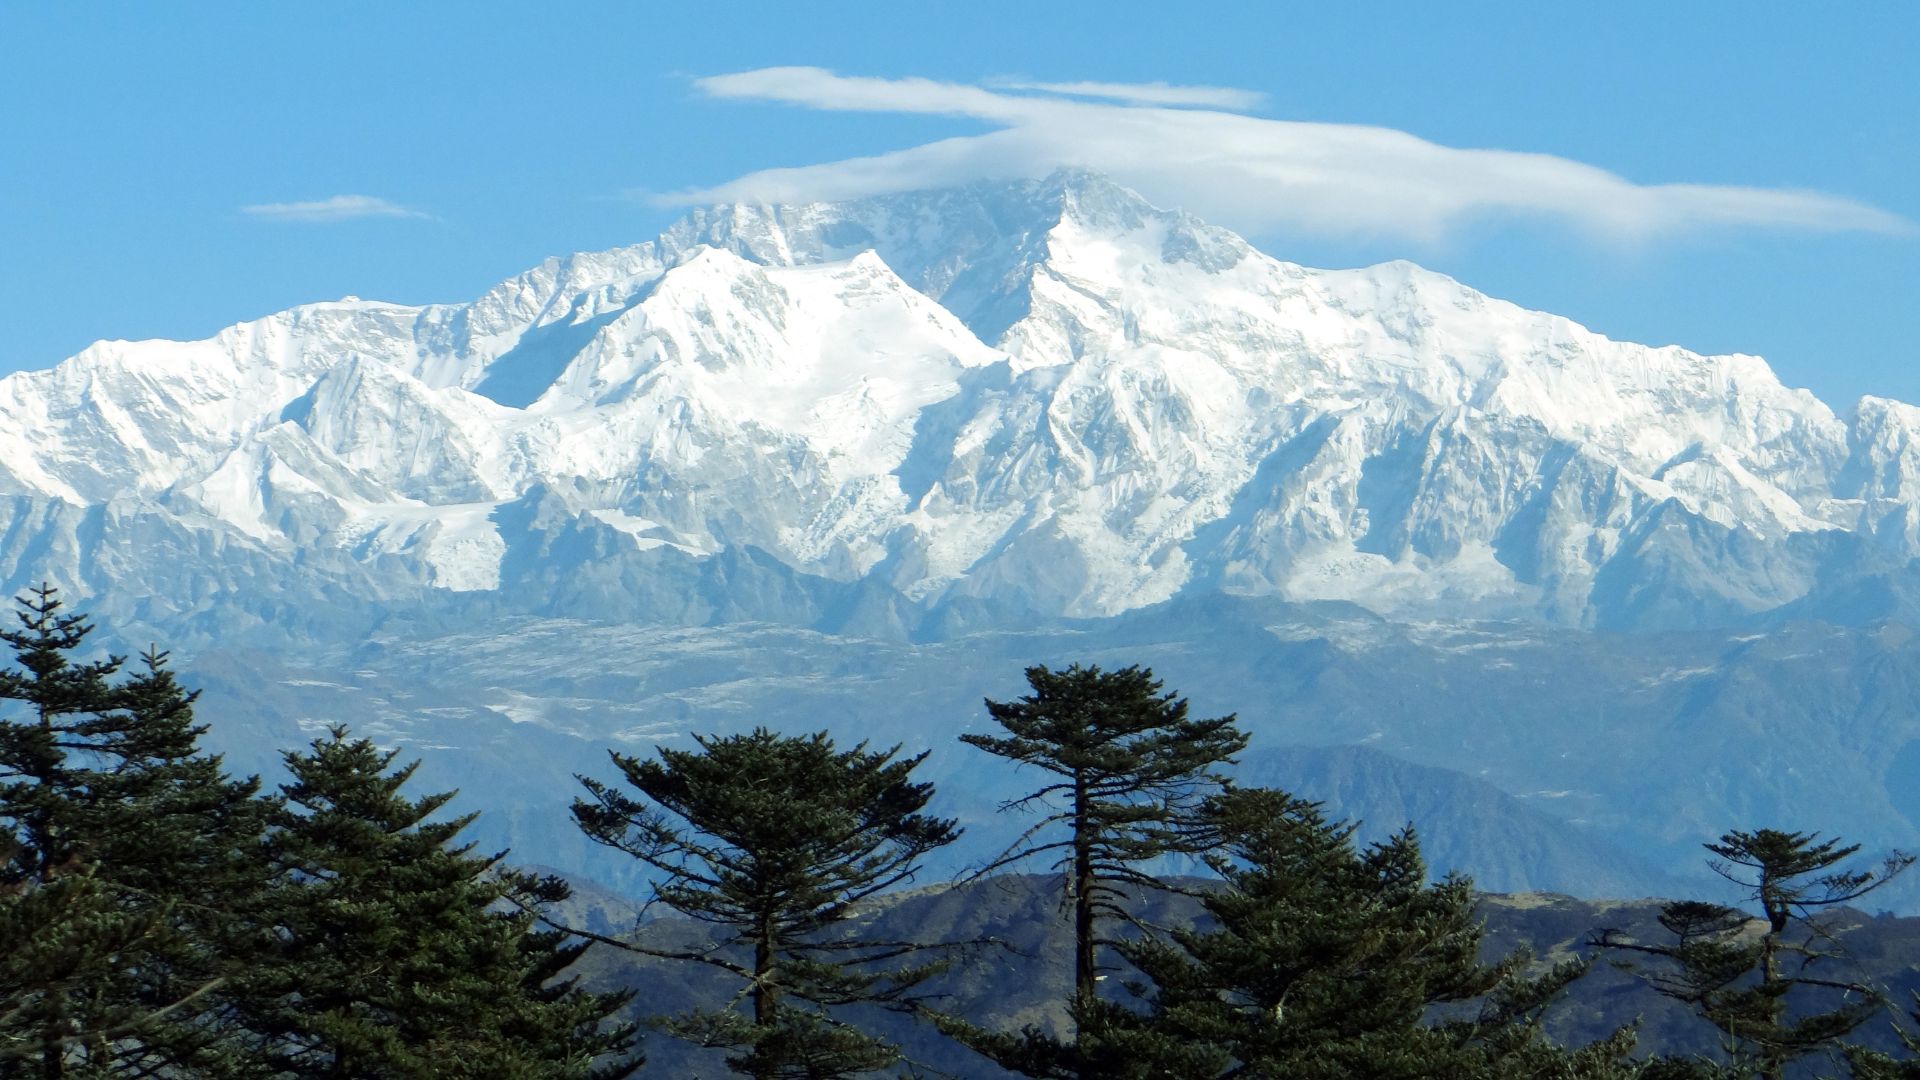 A Mountain Covered In Snow in Sandakphu